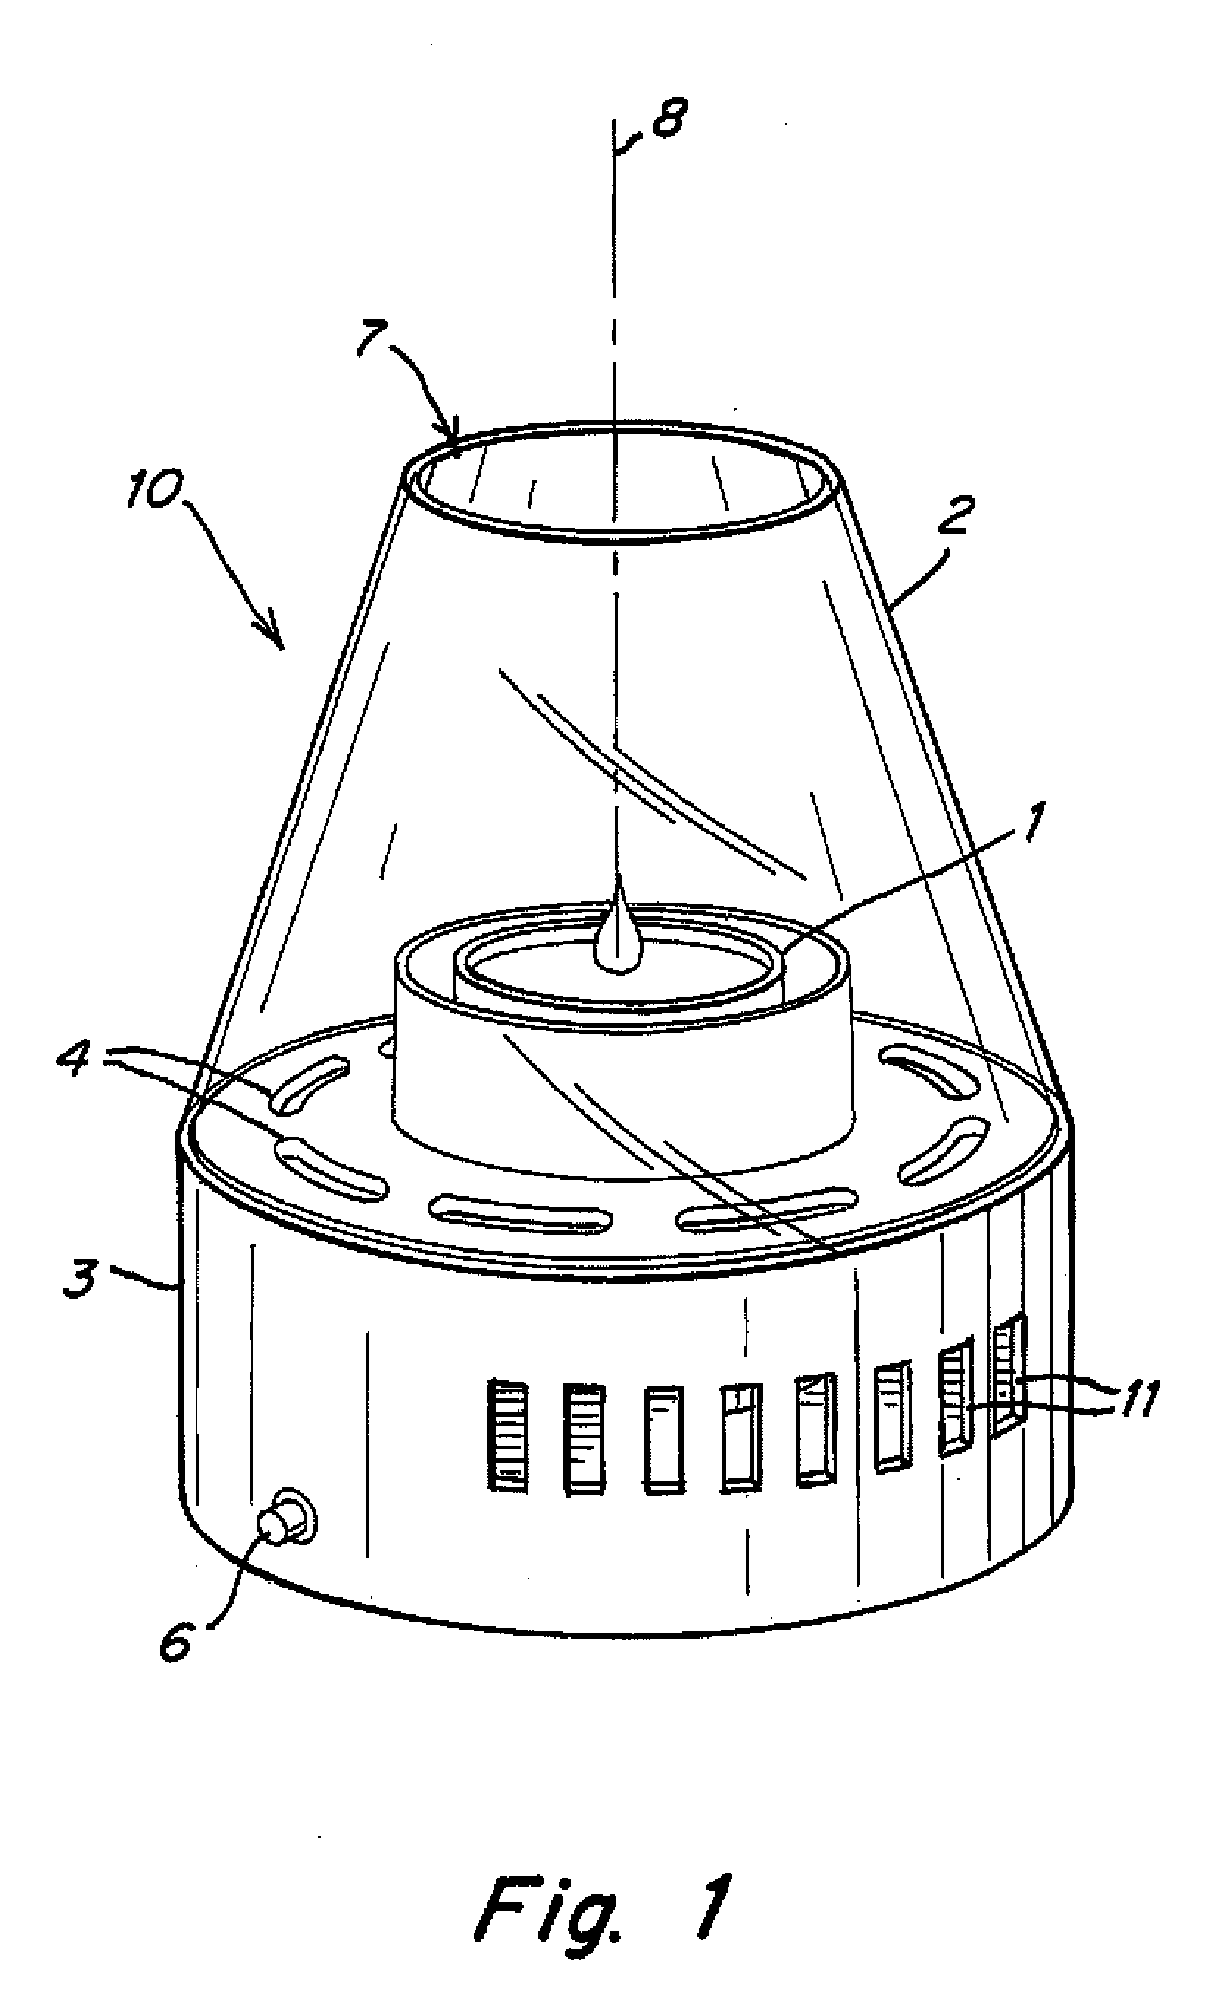 Method and apparatus for diffusing the fragrance of a burning candle